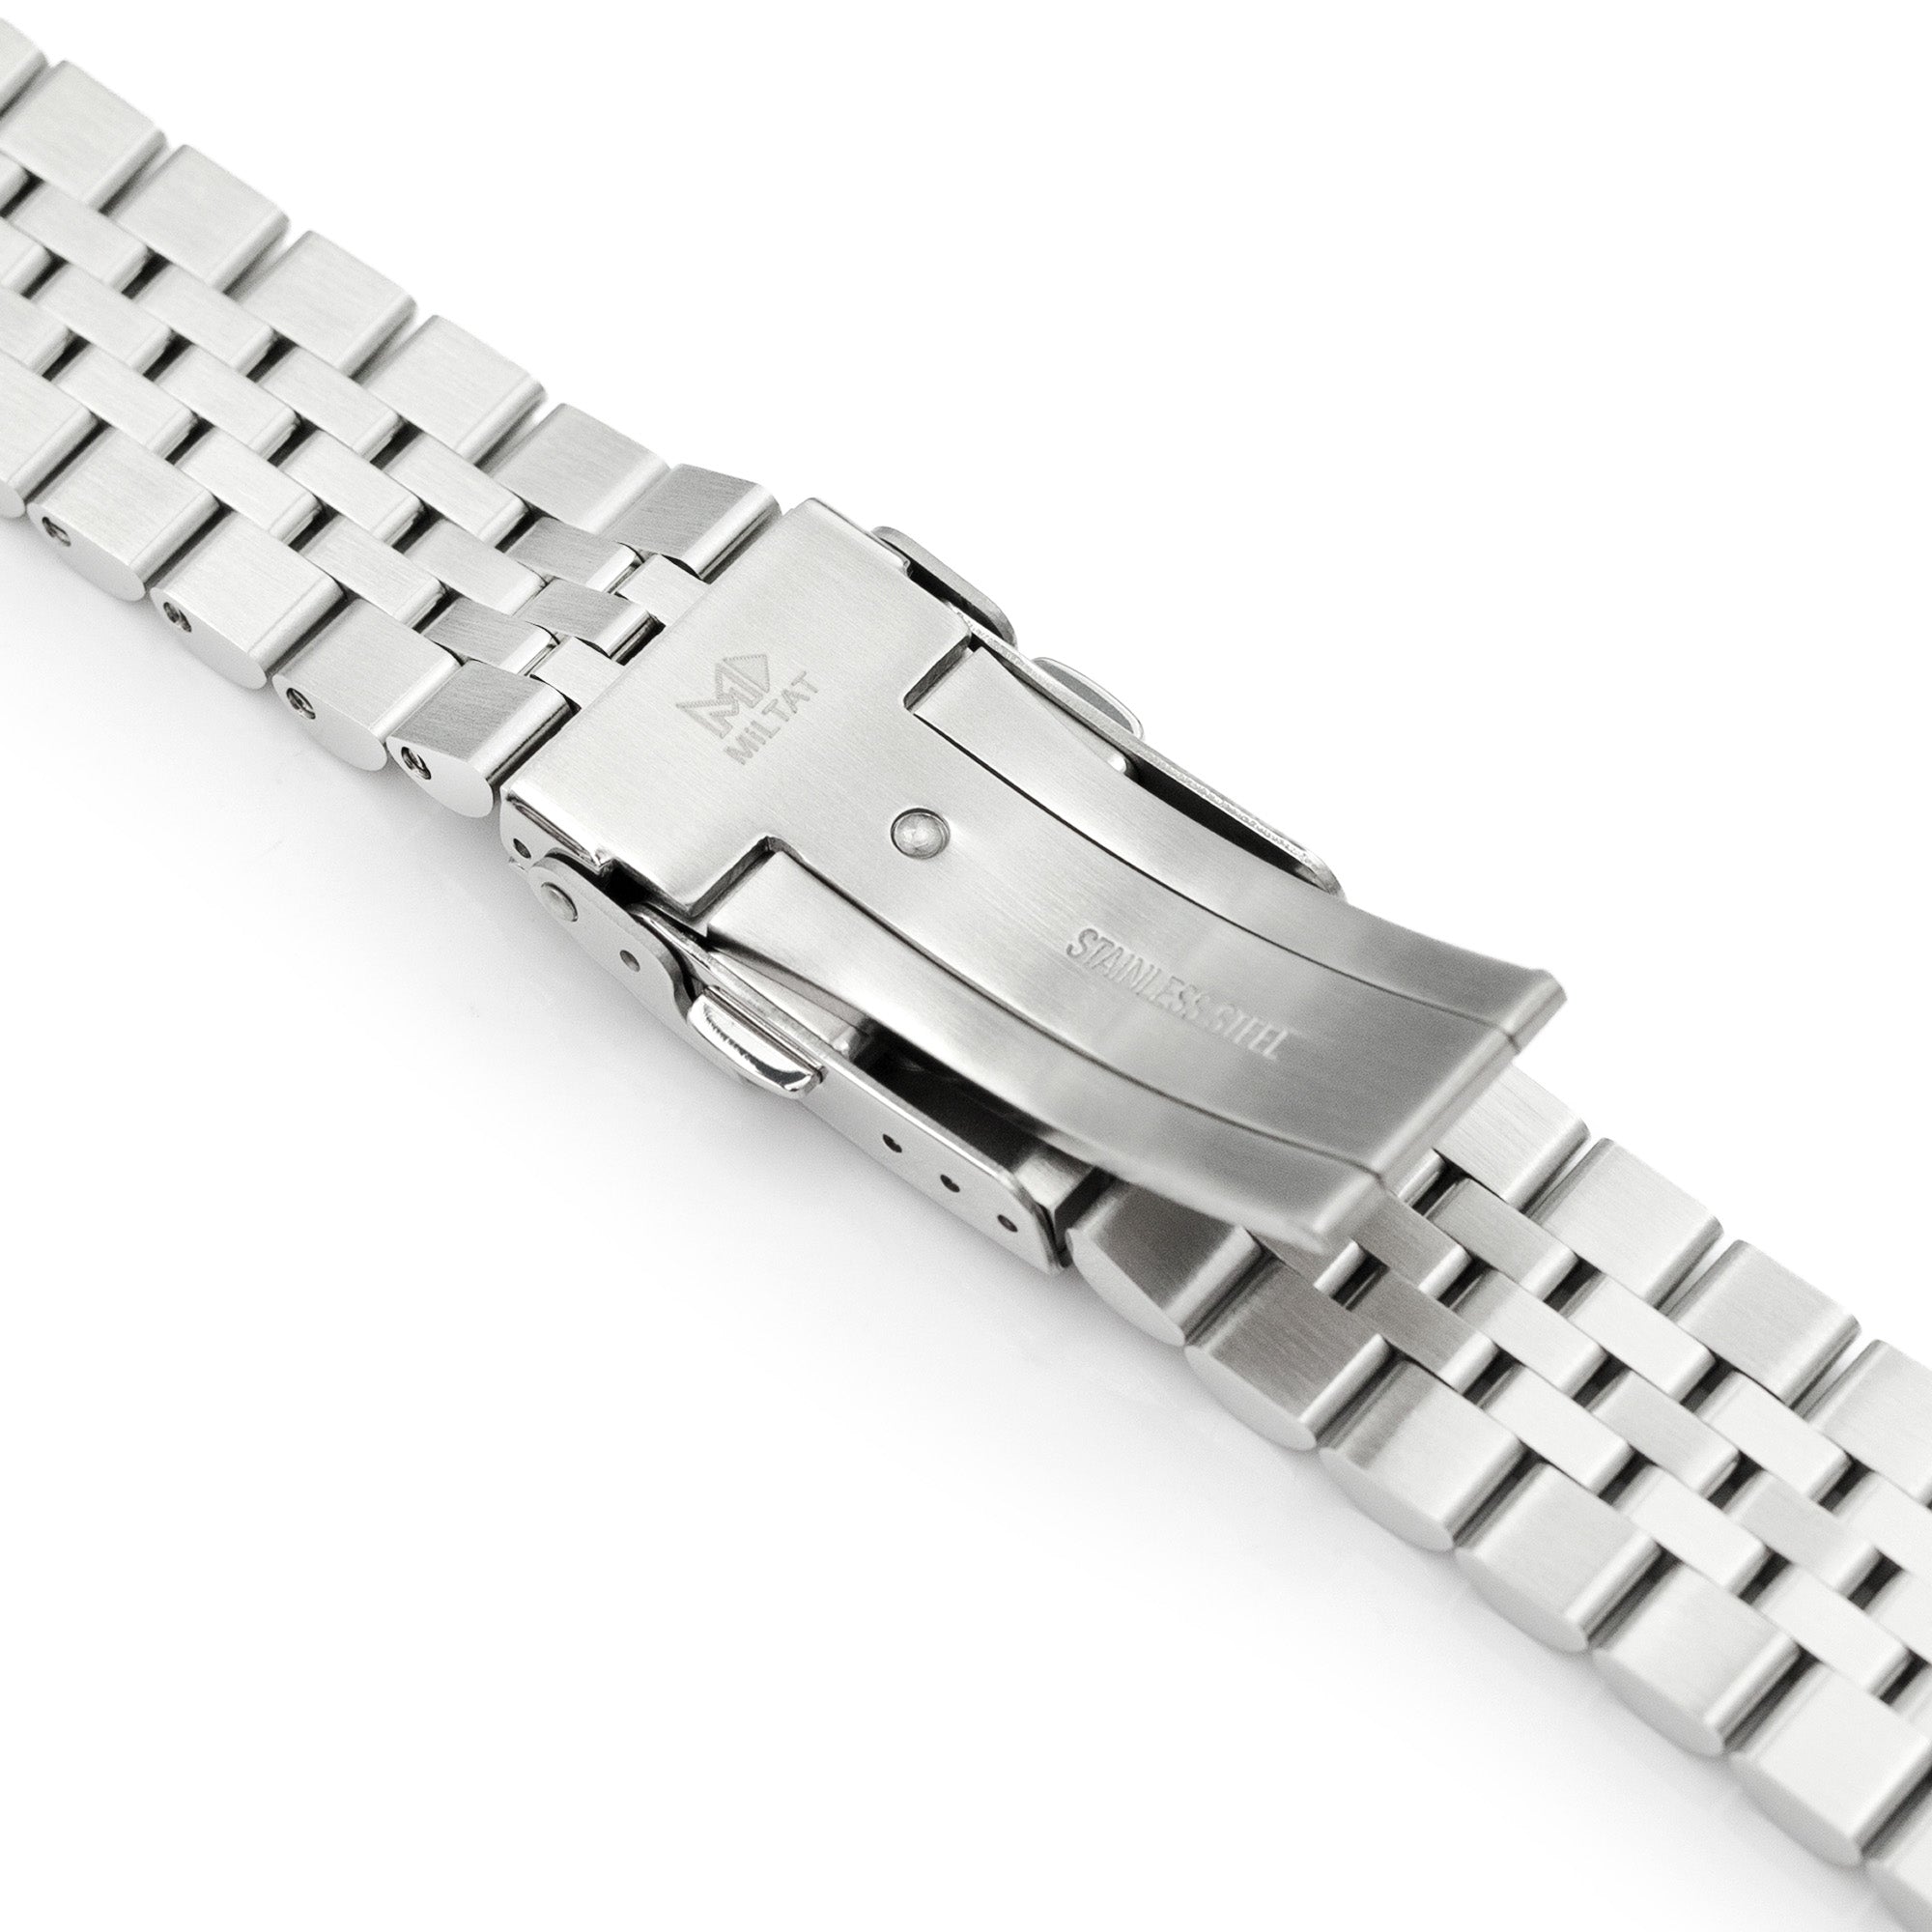 22mm Super-J Louis JUB Watch Band for Seiko New Turtles SRP777 SRP775 SRPA21 (PADI), Stainless Steel - Brushed, Polished Center Links, Diver Clasp